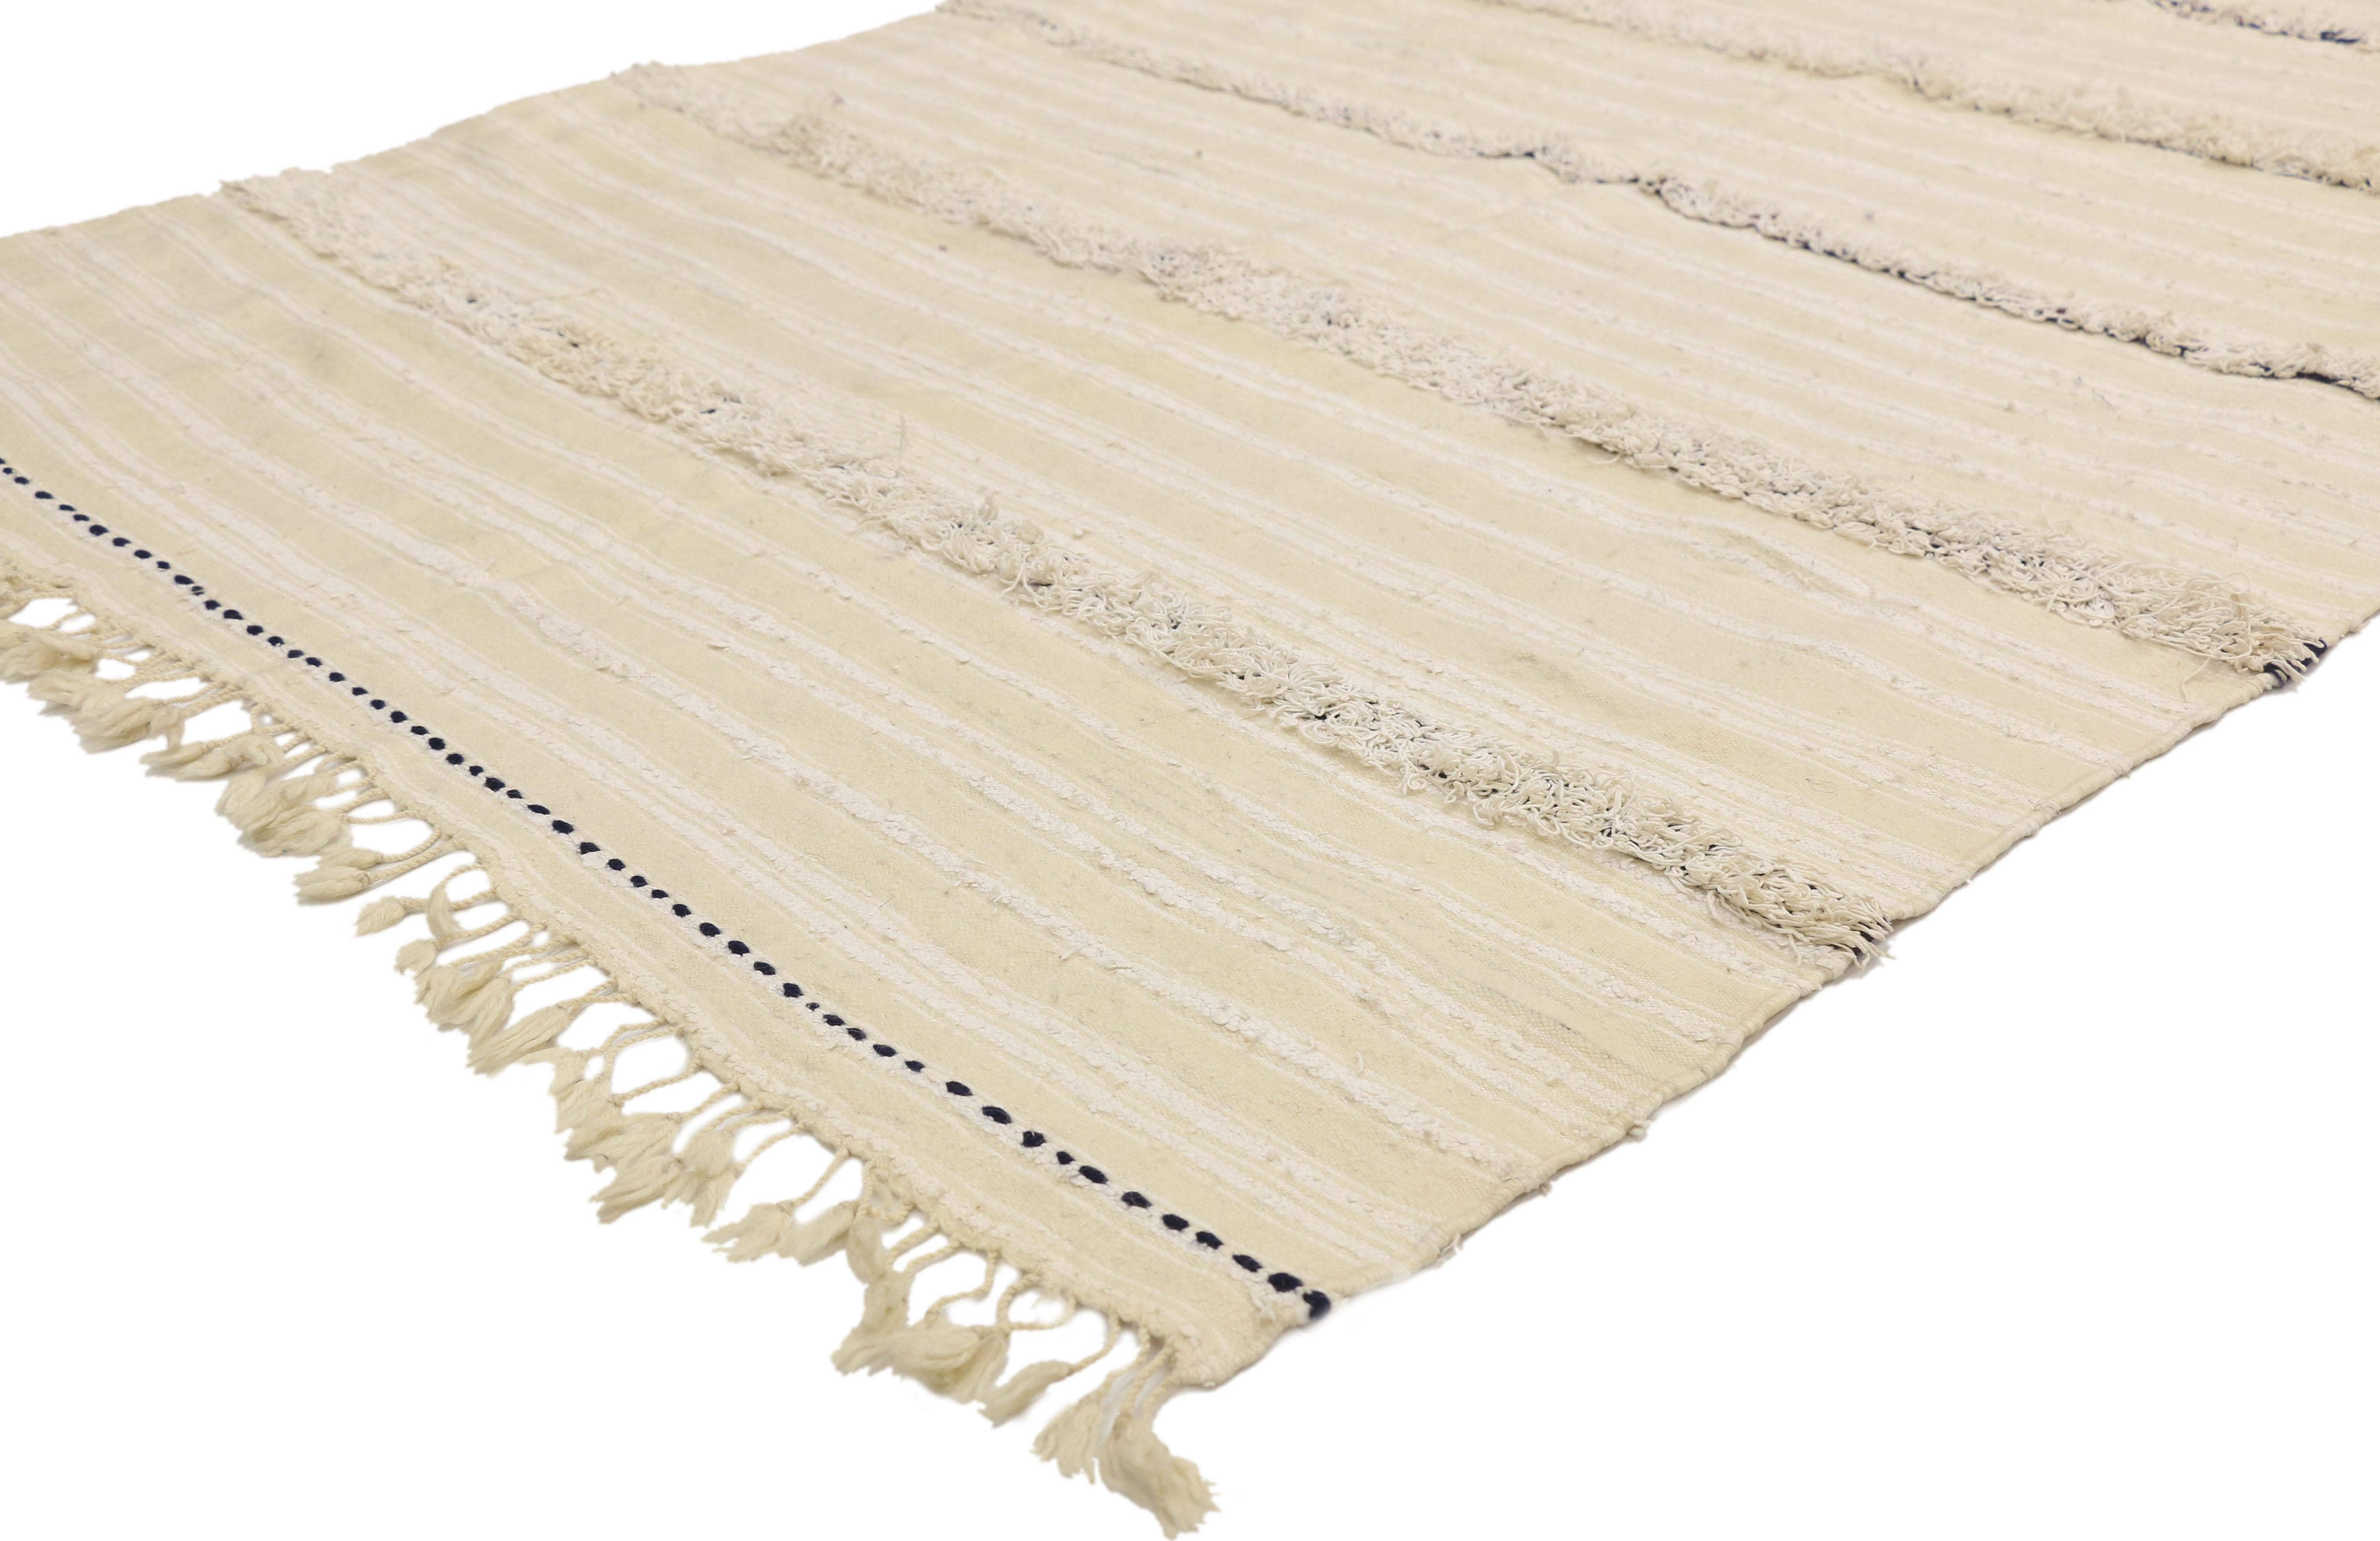 20826 Vintage Moroccan wedding blanket, Berber Handira Tamizart 04'00 x 06'10. This handwoven wool vintage Moroccan wedding blanket also known as a Berber Handira features rows of fluffy fringe embellished with accent colors. The underside of this